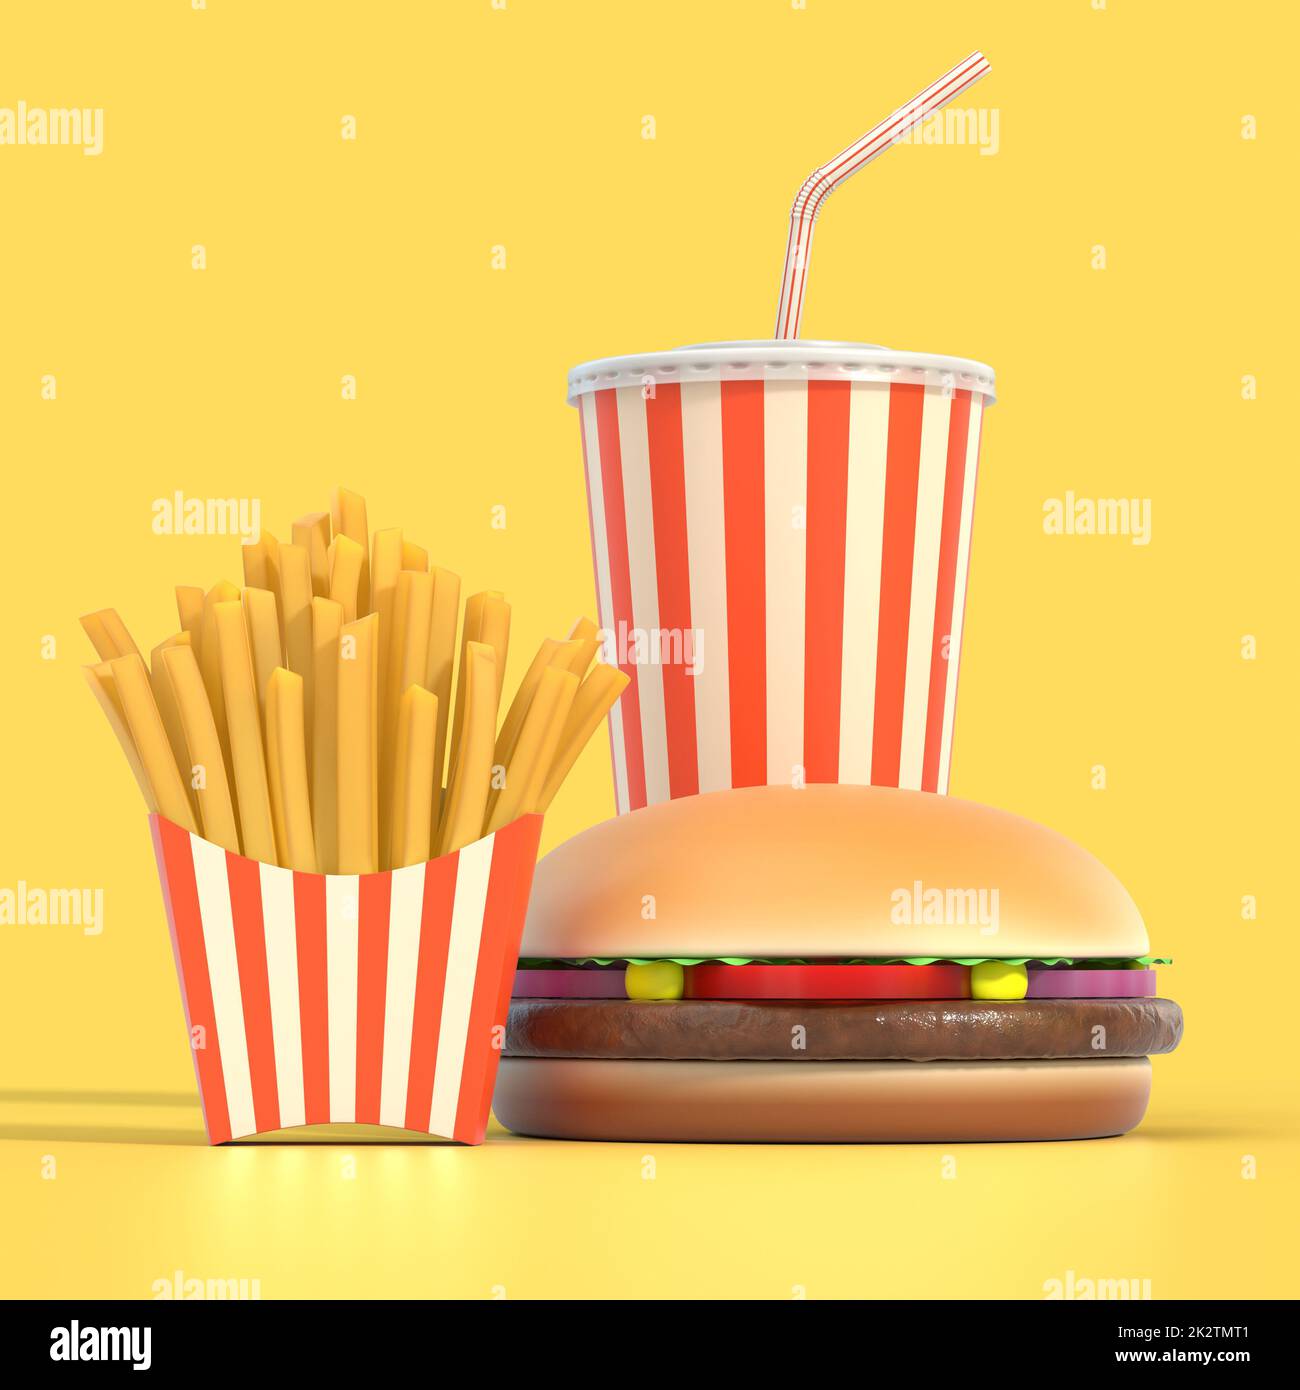 Hamburger, french fries and cola fast food meal Stock Photo